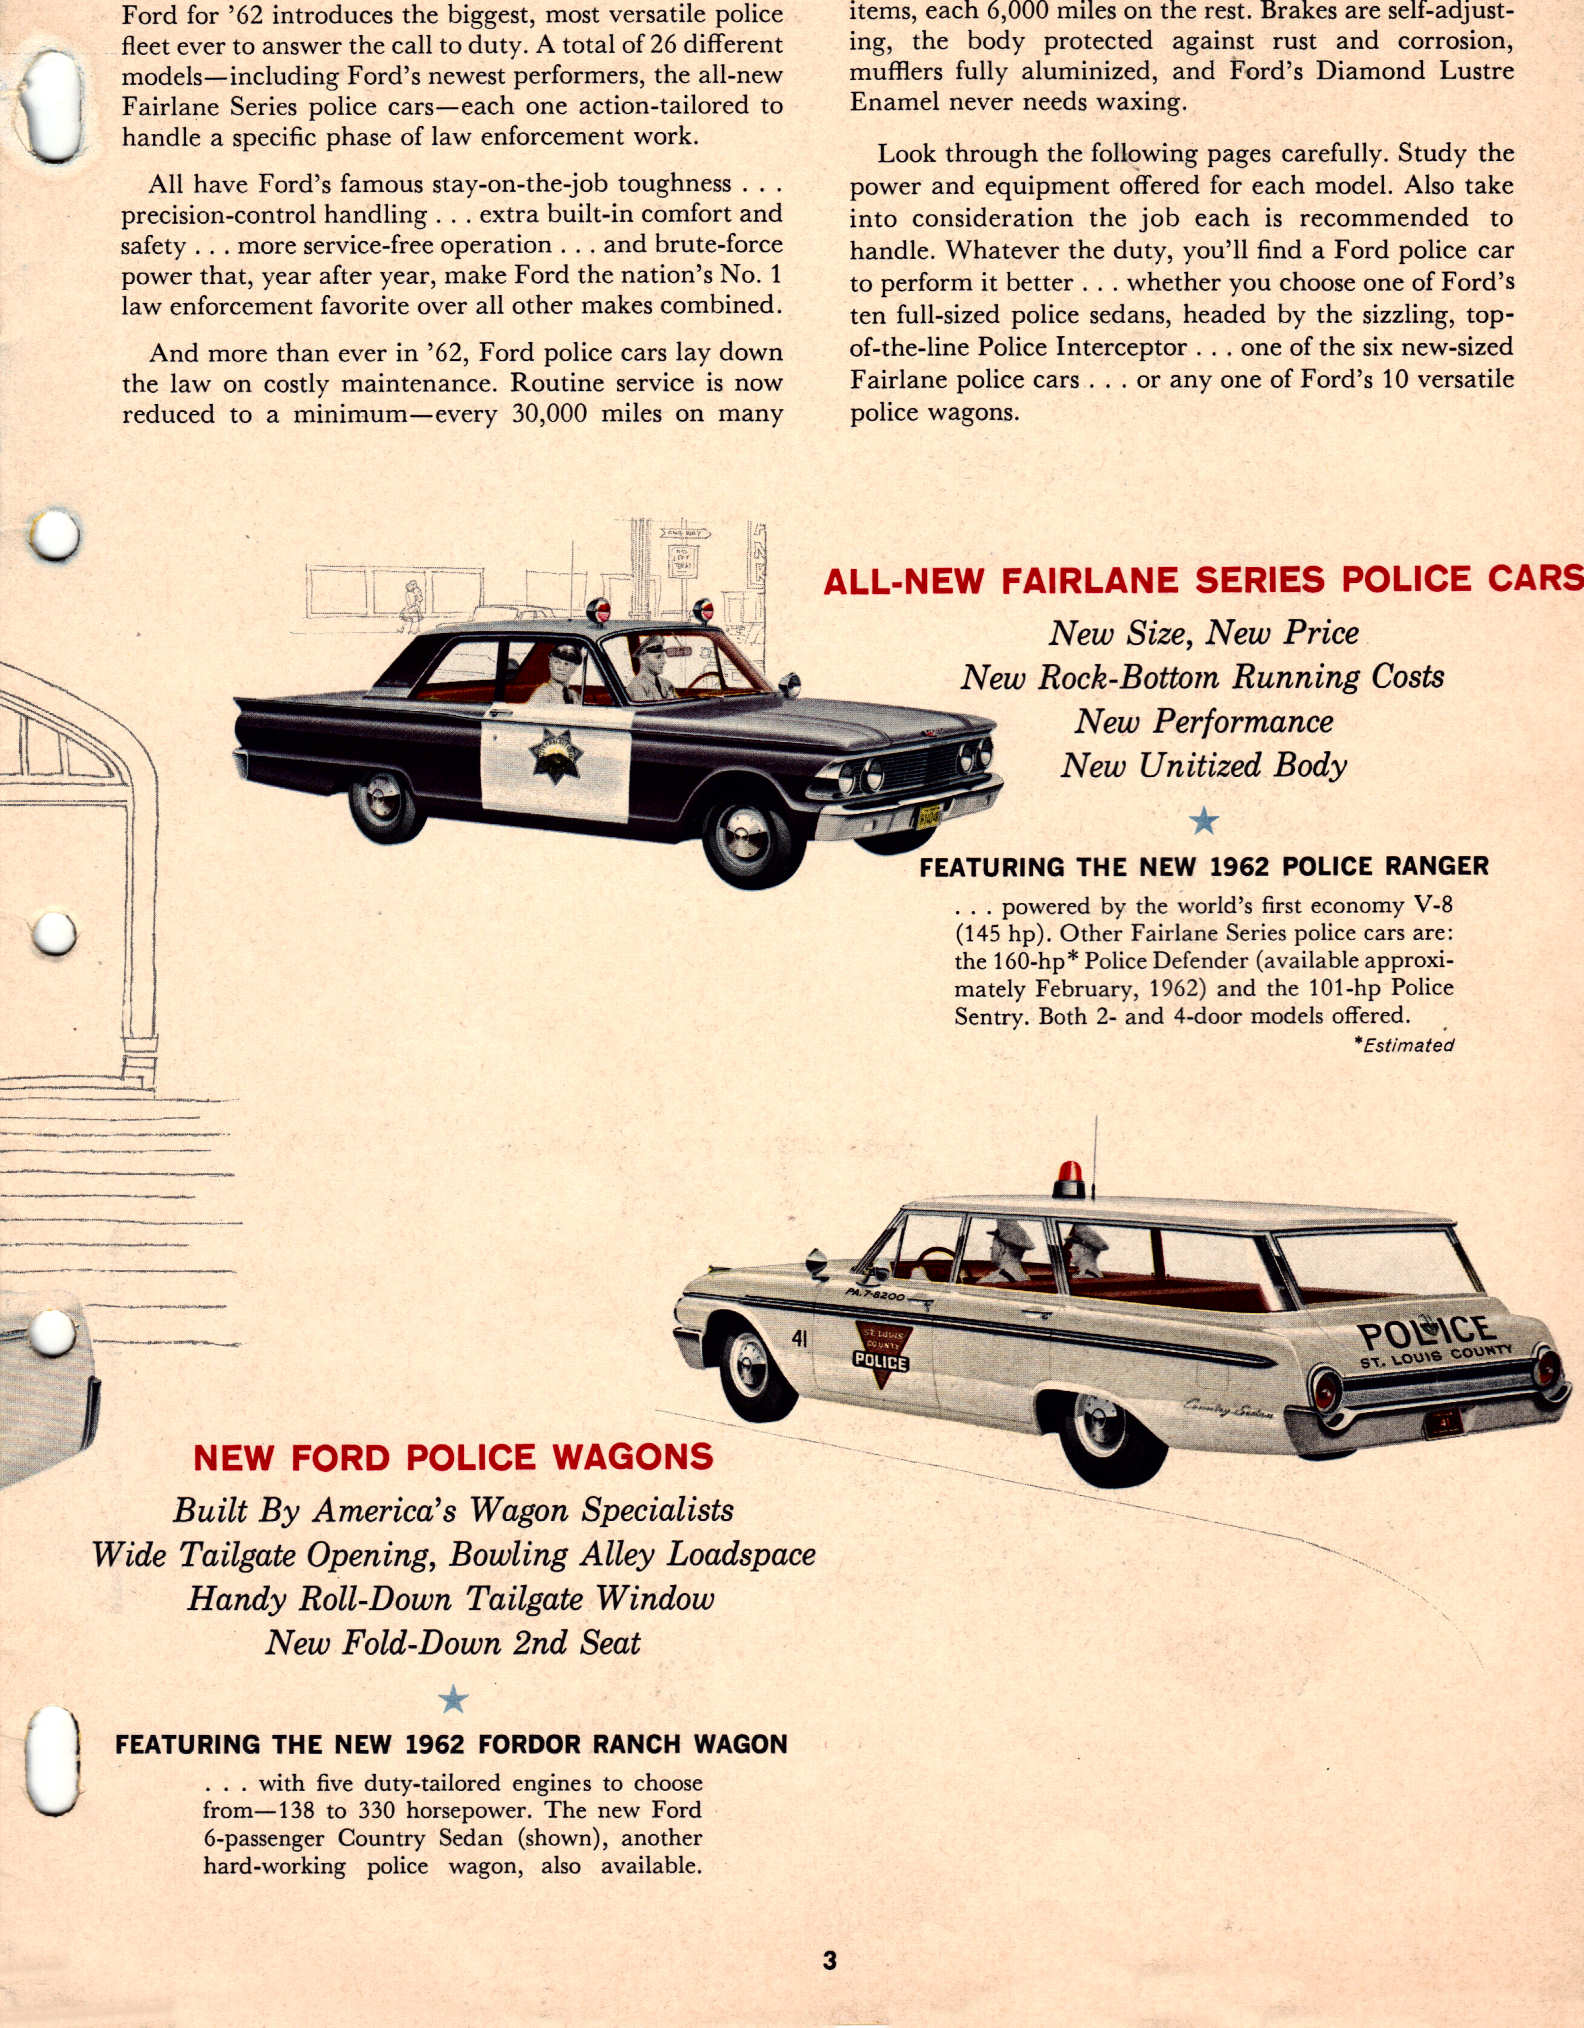 1962_Ford_Police_Cars-03